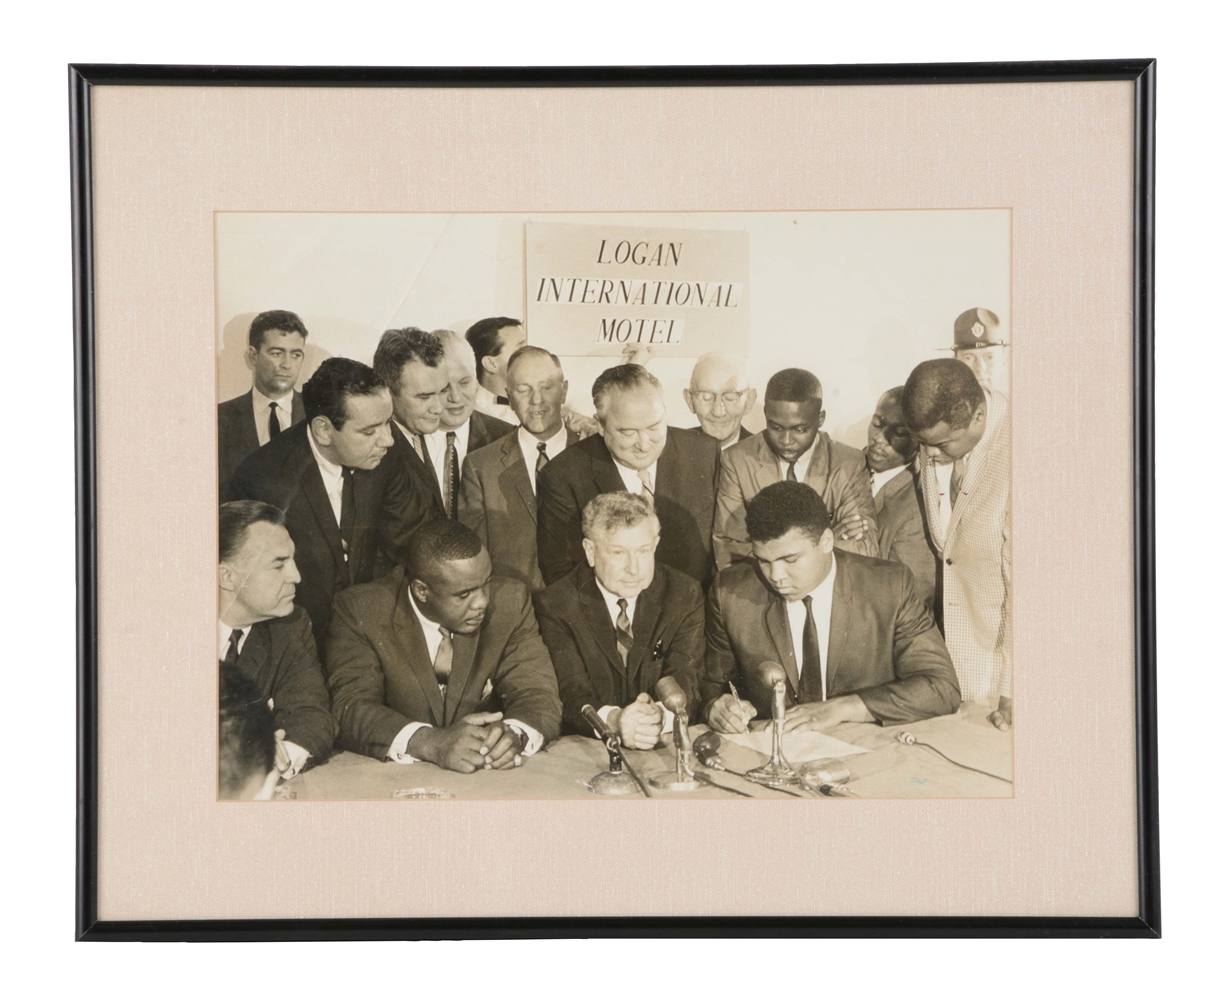 OVERSIZED CASSIUS CLAY AND SONNY LISTON CONTRACT SIGNING PHOTO.